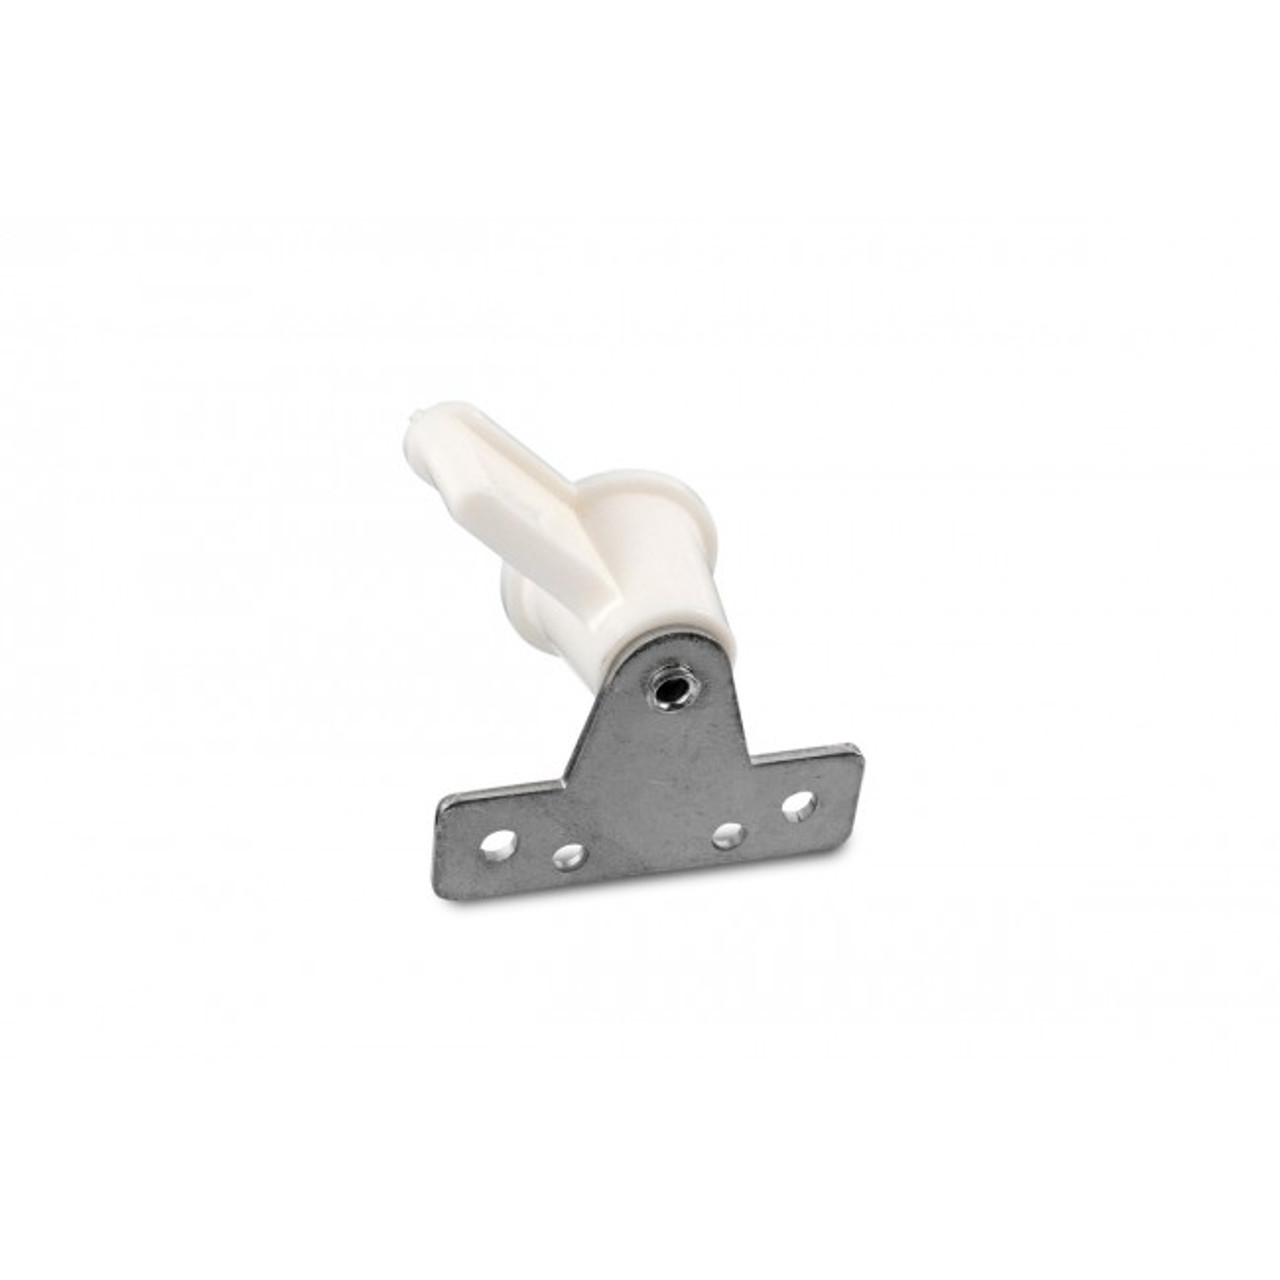 Pushout Window Knob Lock With Metal Plate, White | 35438